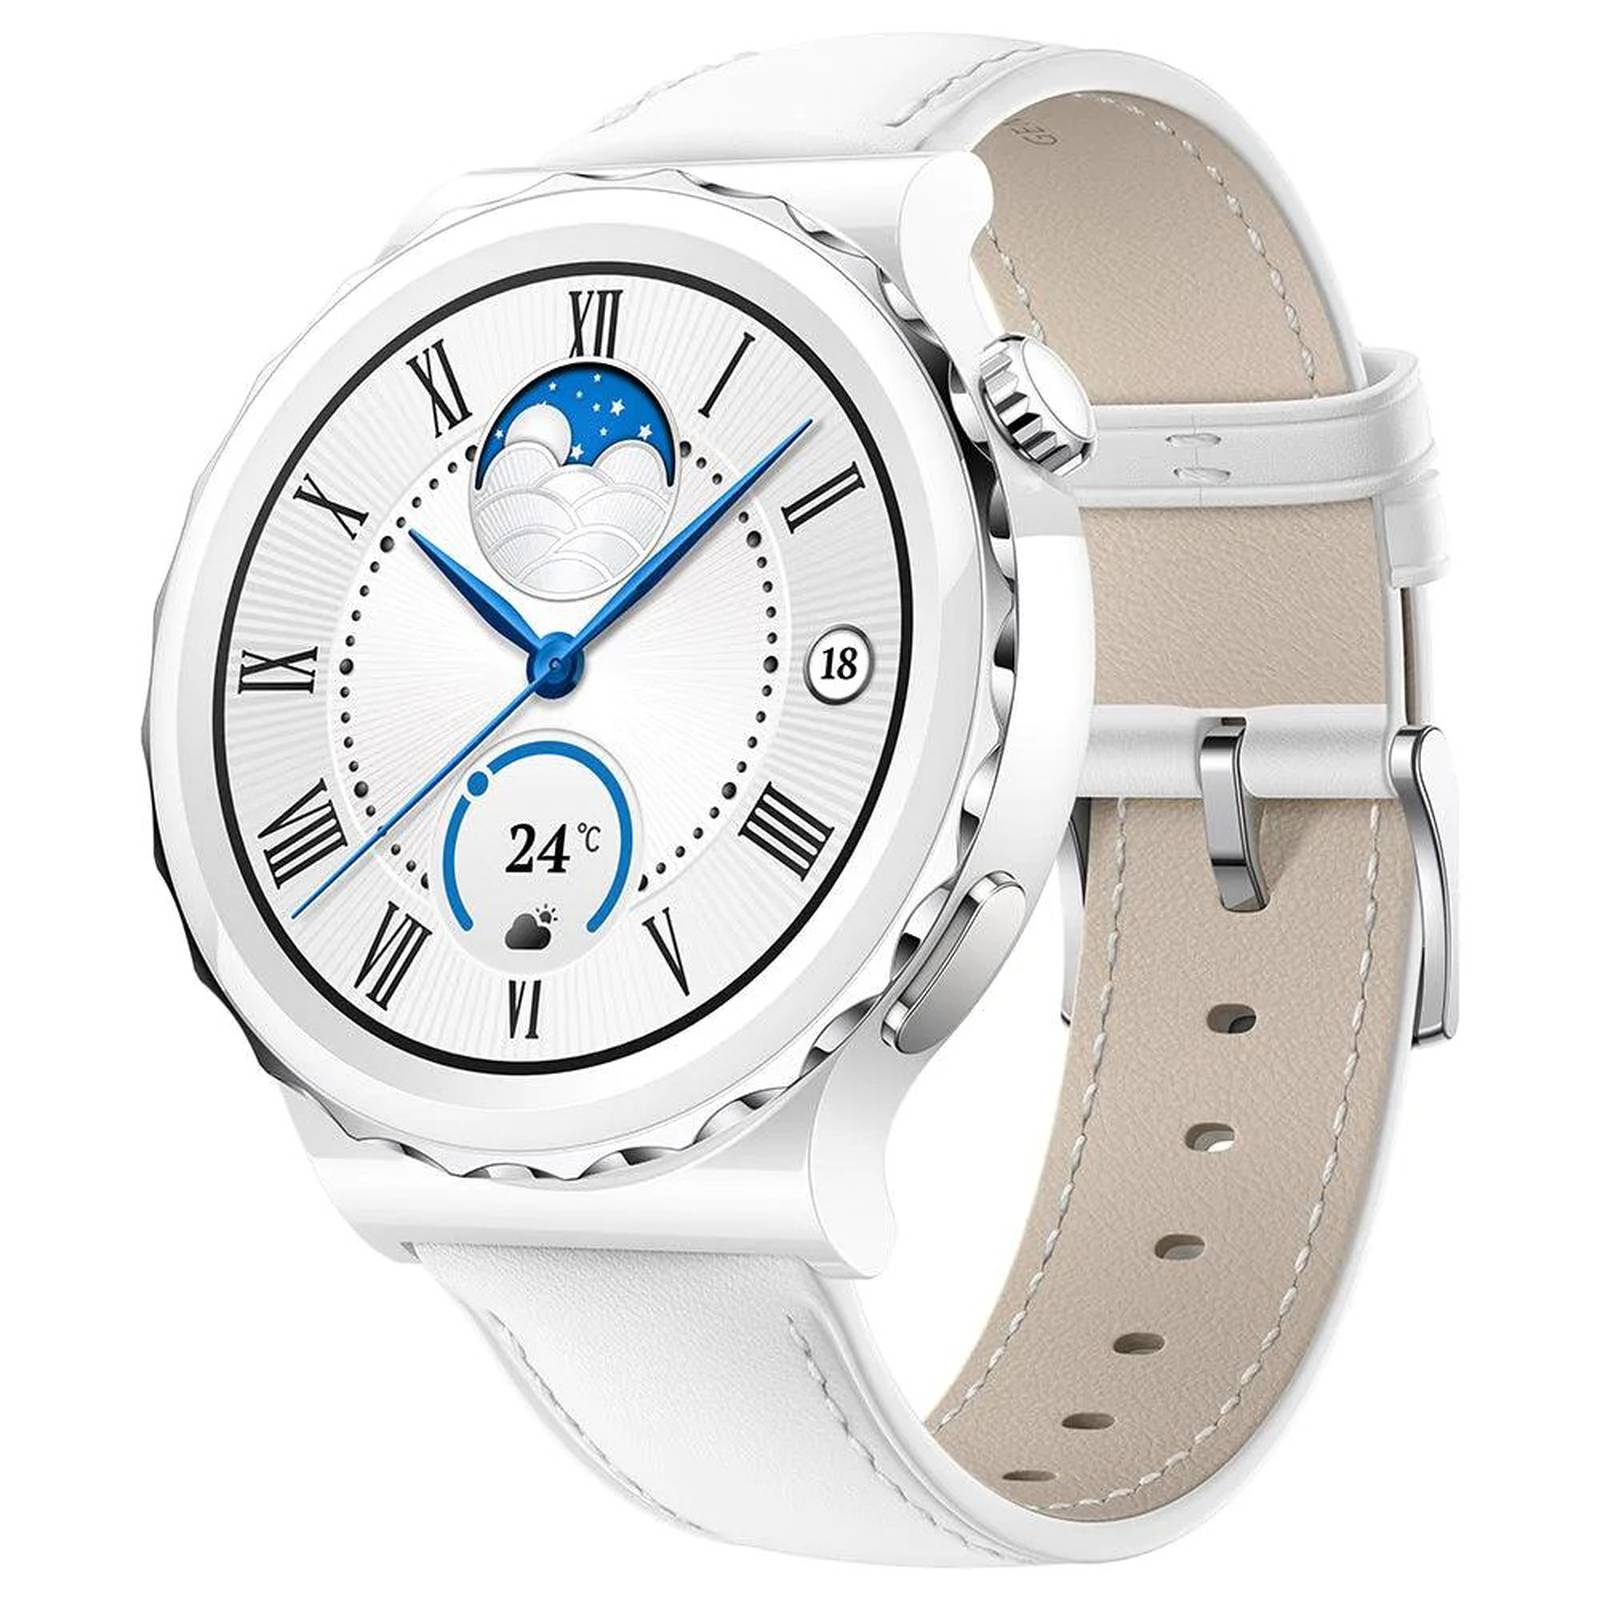 The white ceramic version of the Watch GT 3 Pro